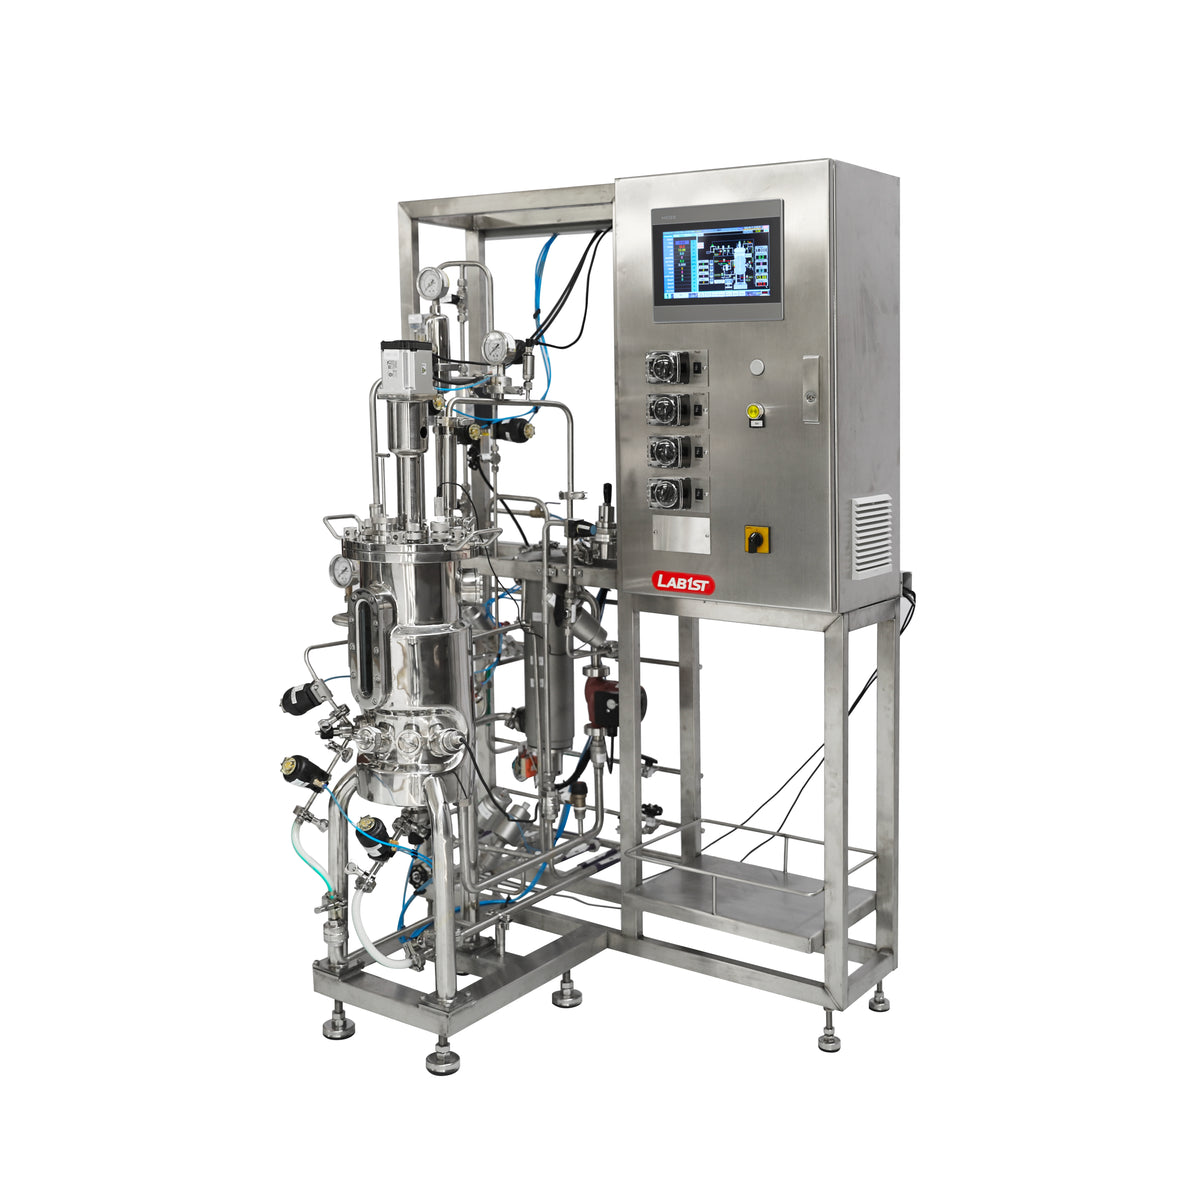 30L Stainless Steel Bioreactor for Microbial Fermentation with 2 Gas Inlets BR500-M1